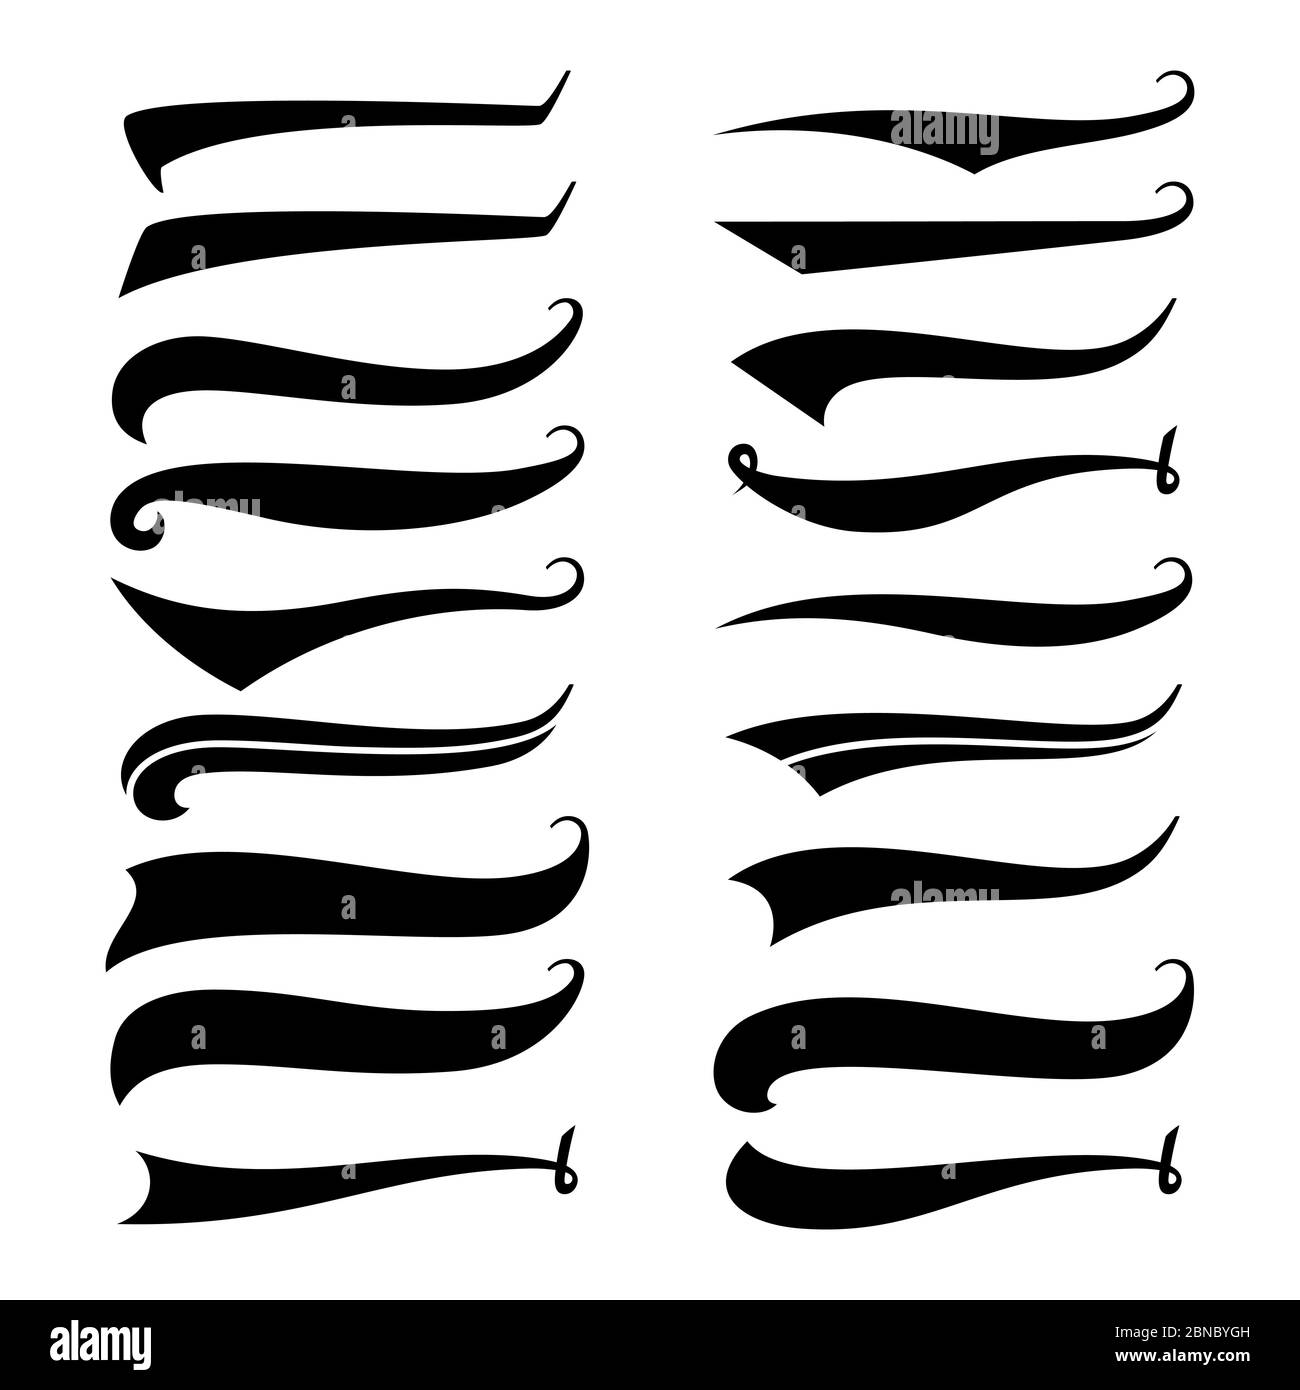 Typographic swash and swooshes tails retro Vector Image